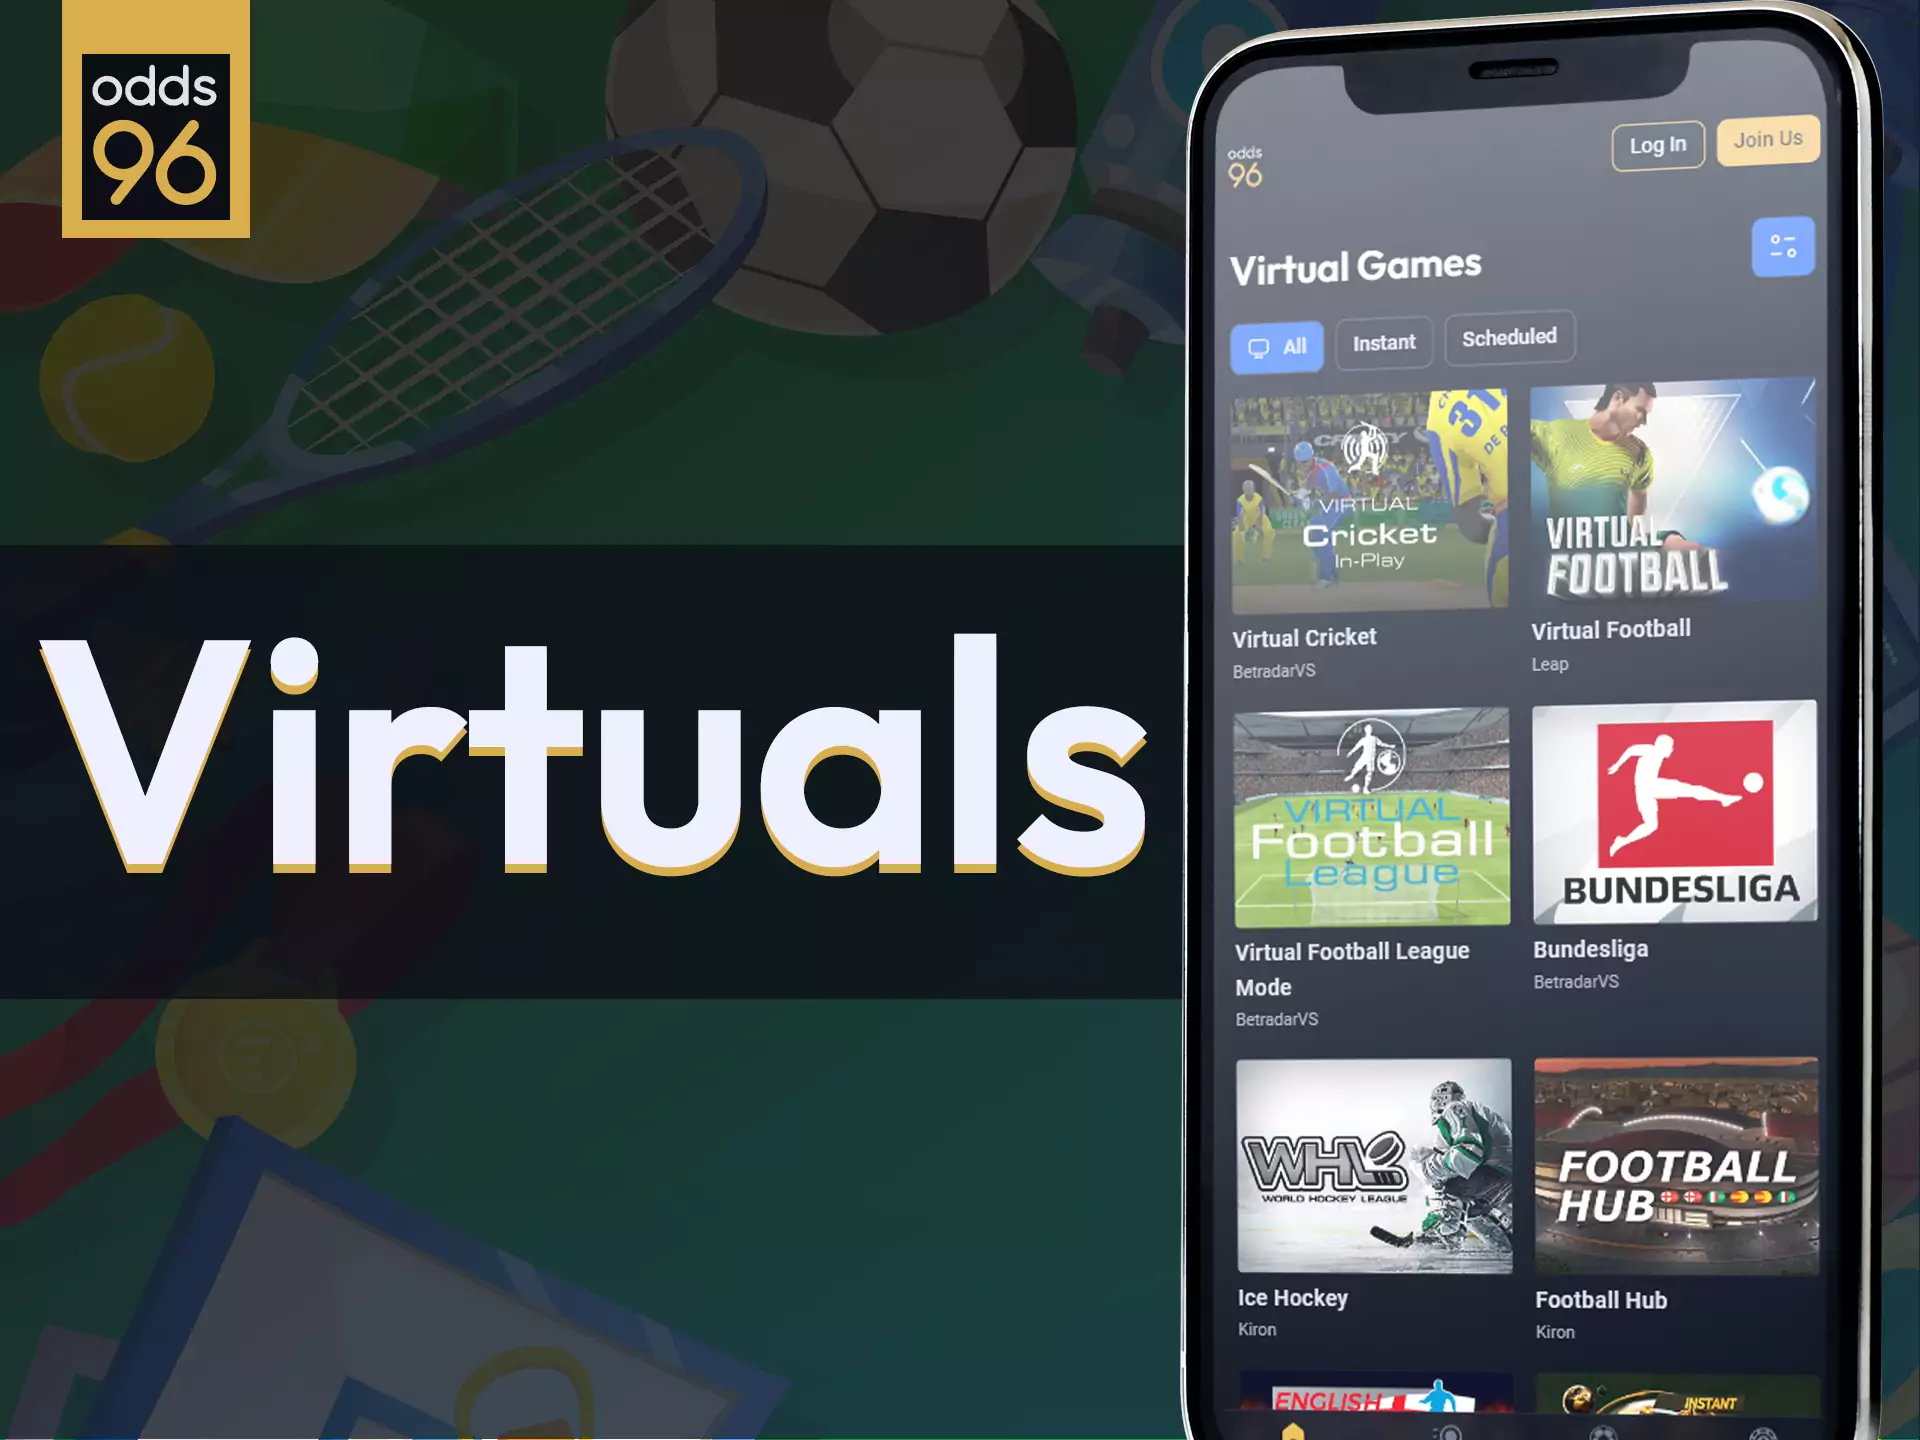 Place bets on virtual sports in Odds96.